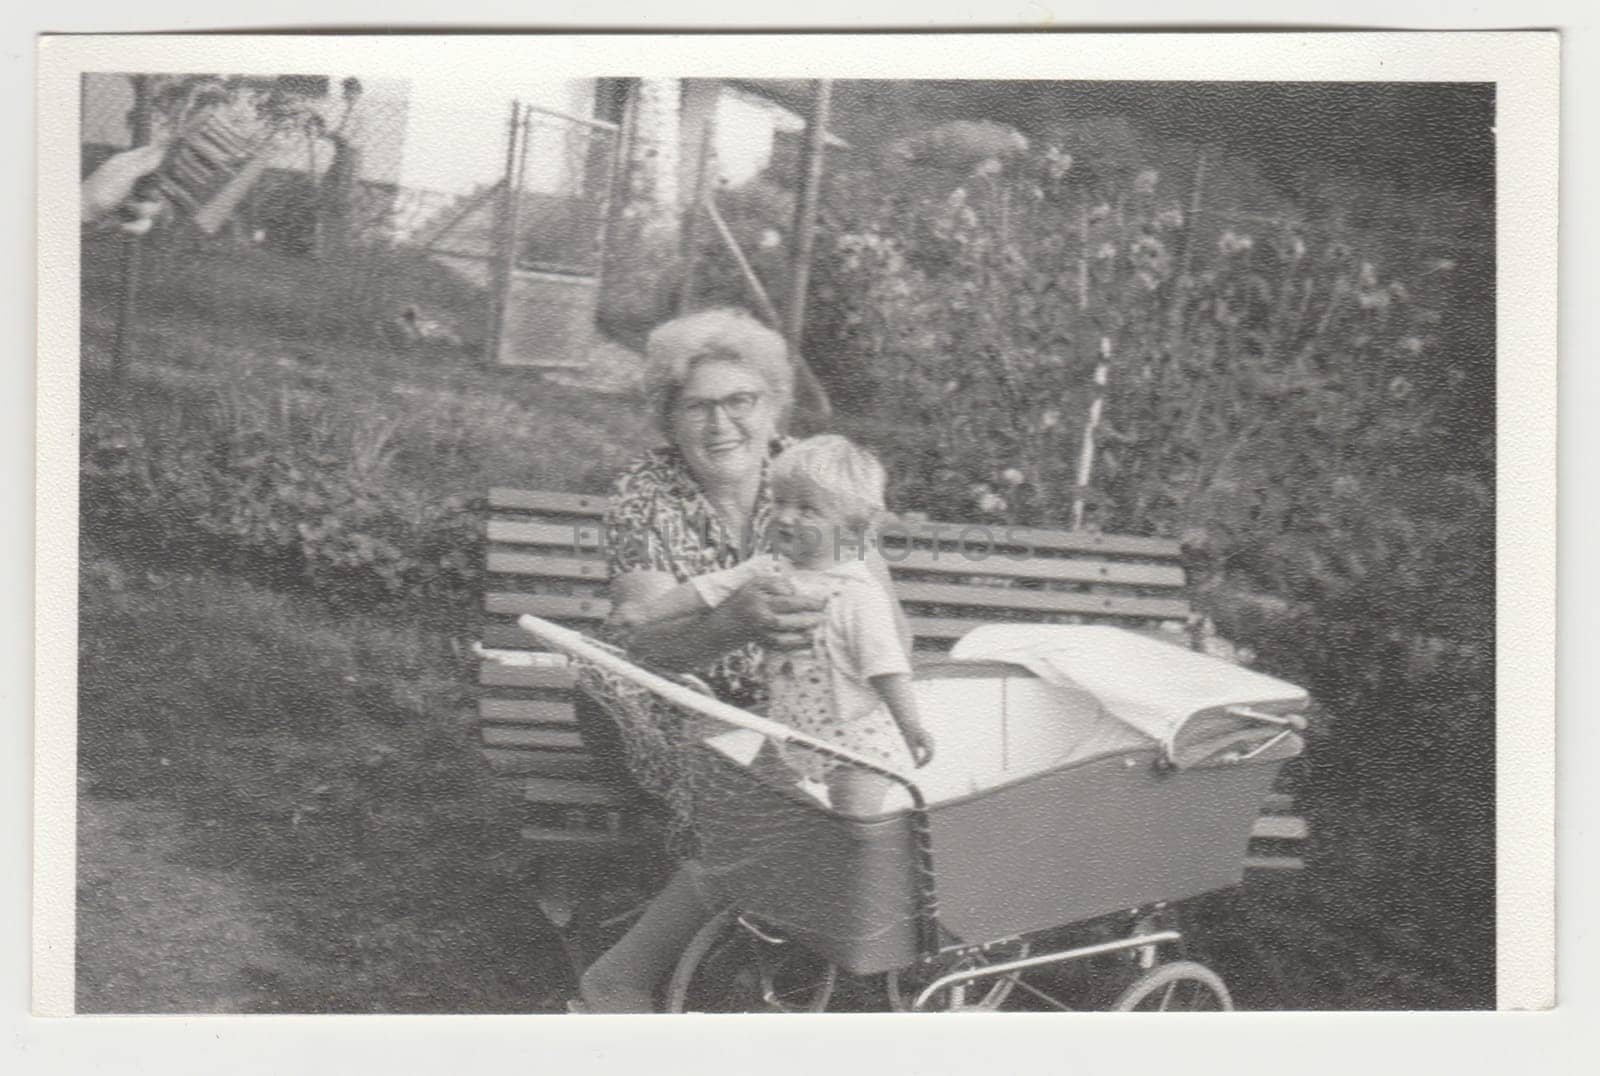 Vintage photo shows grandmother holds a toddler in the pram - carriage. Retro black and white photography. Circa 1980s. by roman_nerud